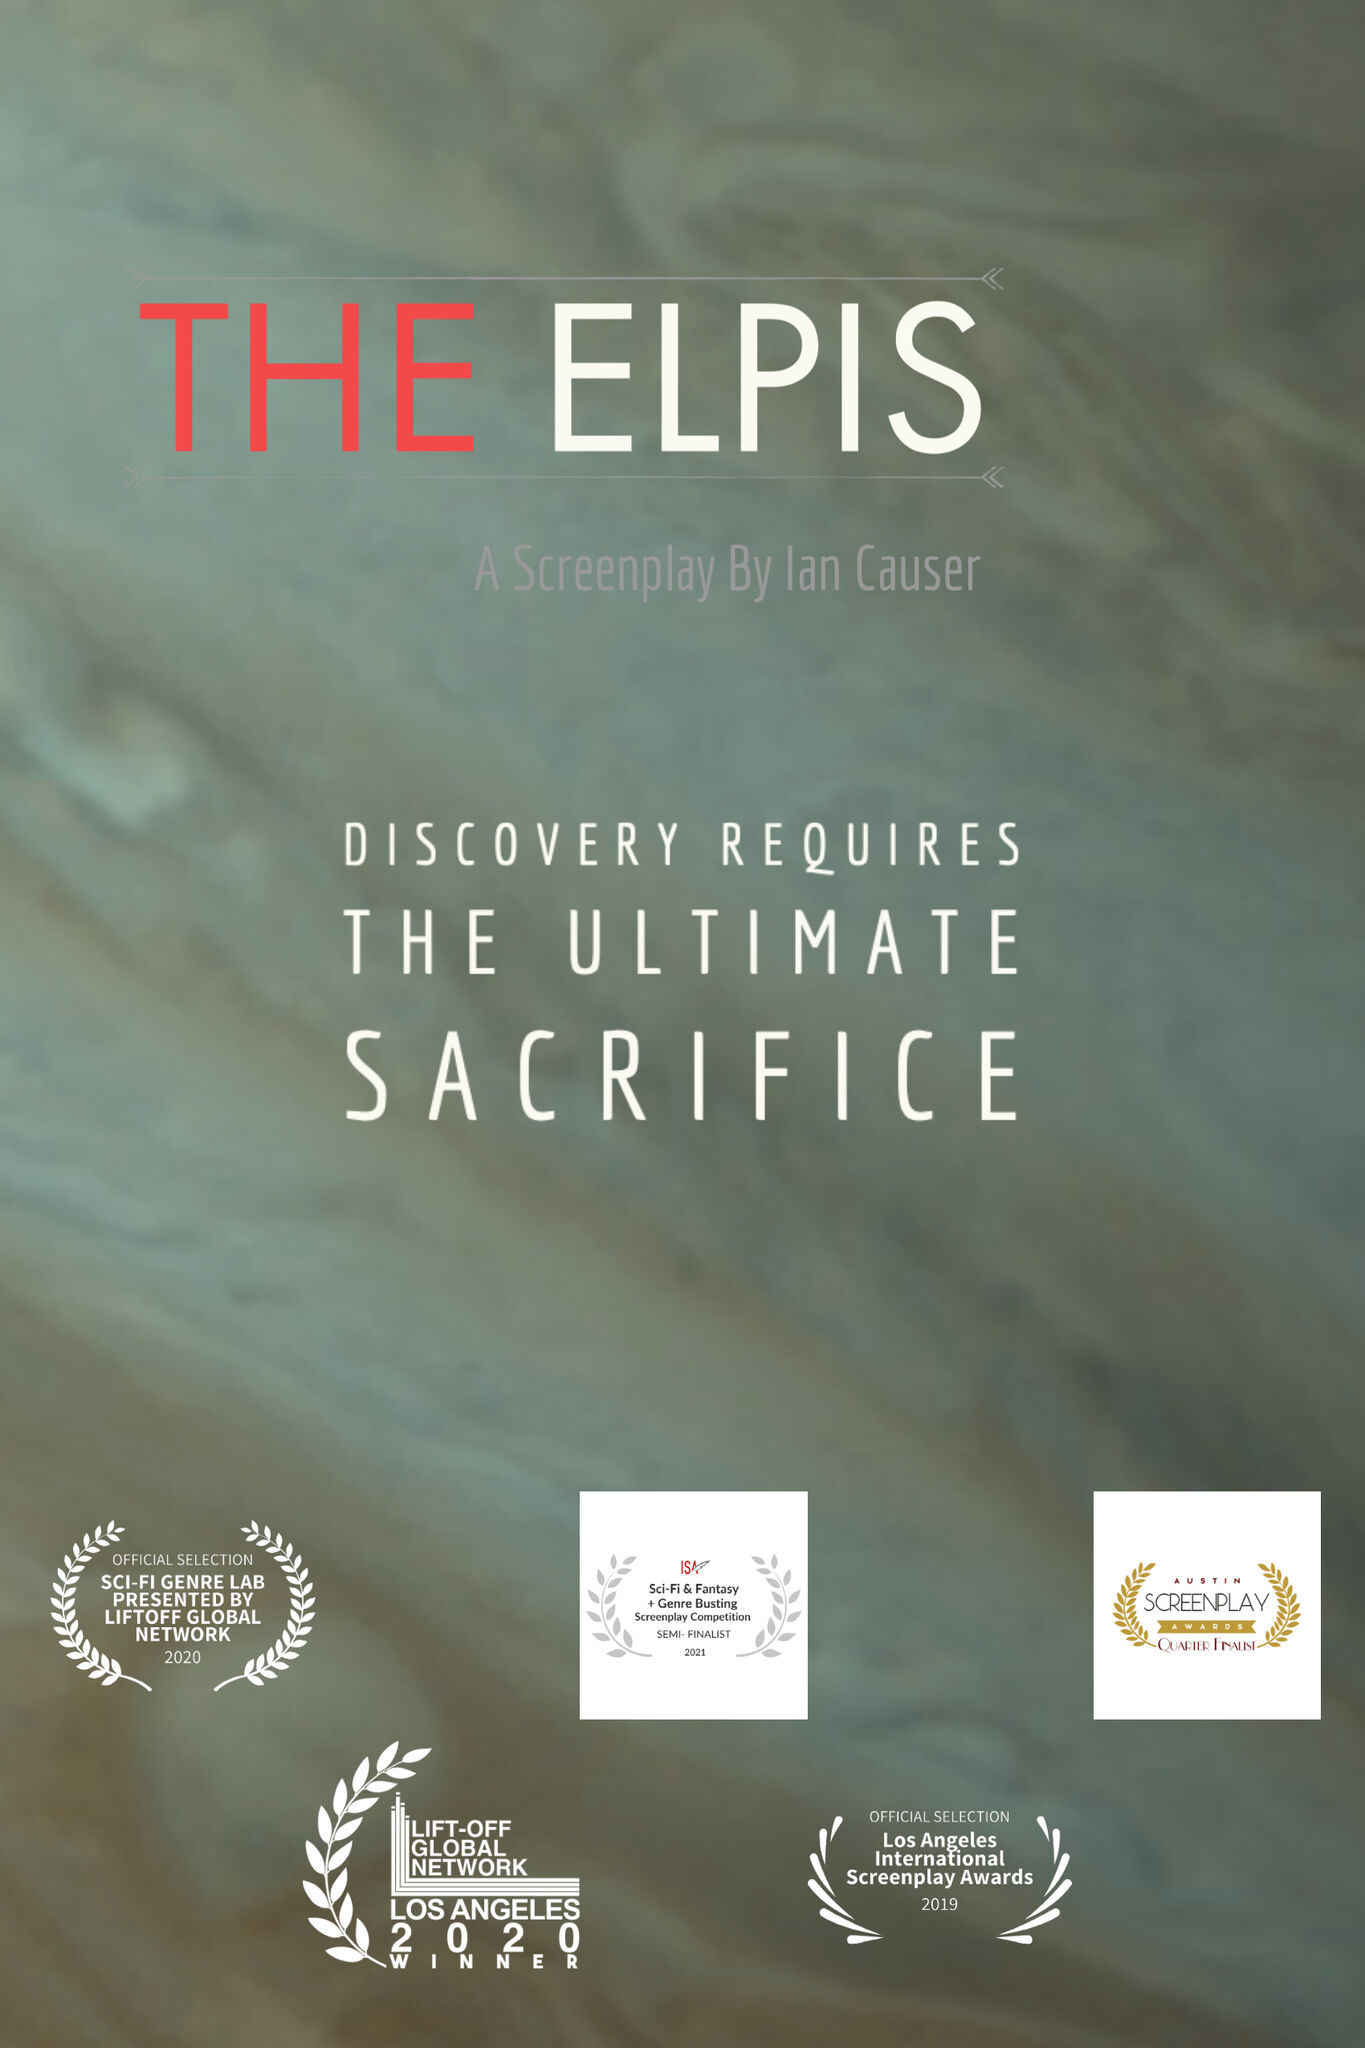 THE ELPIS